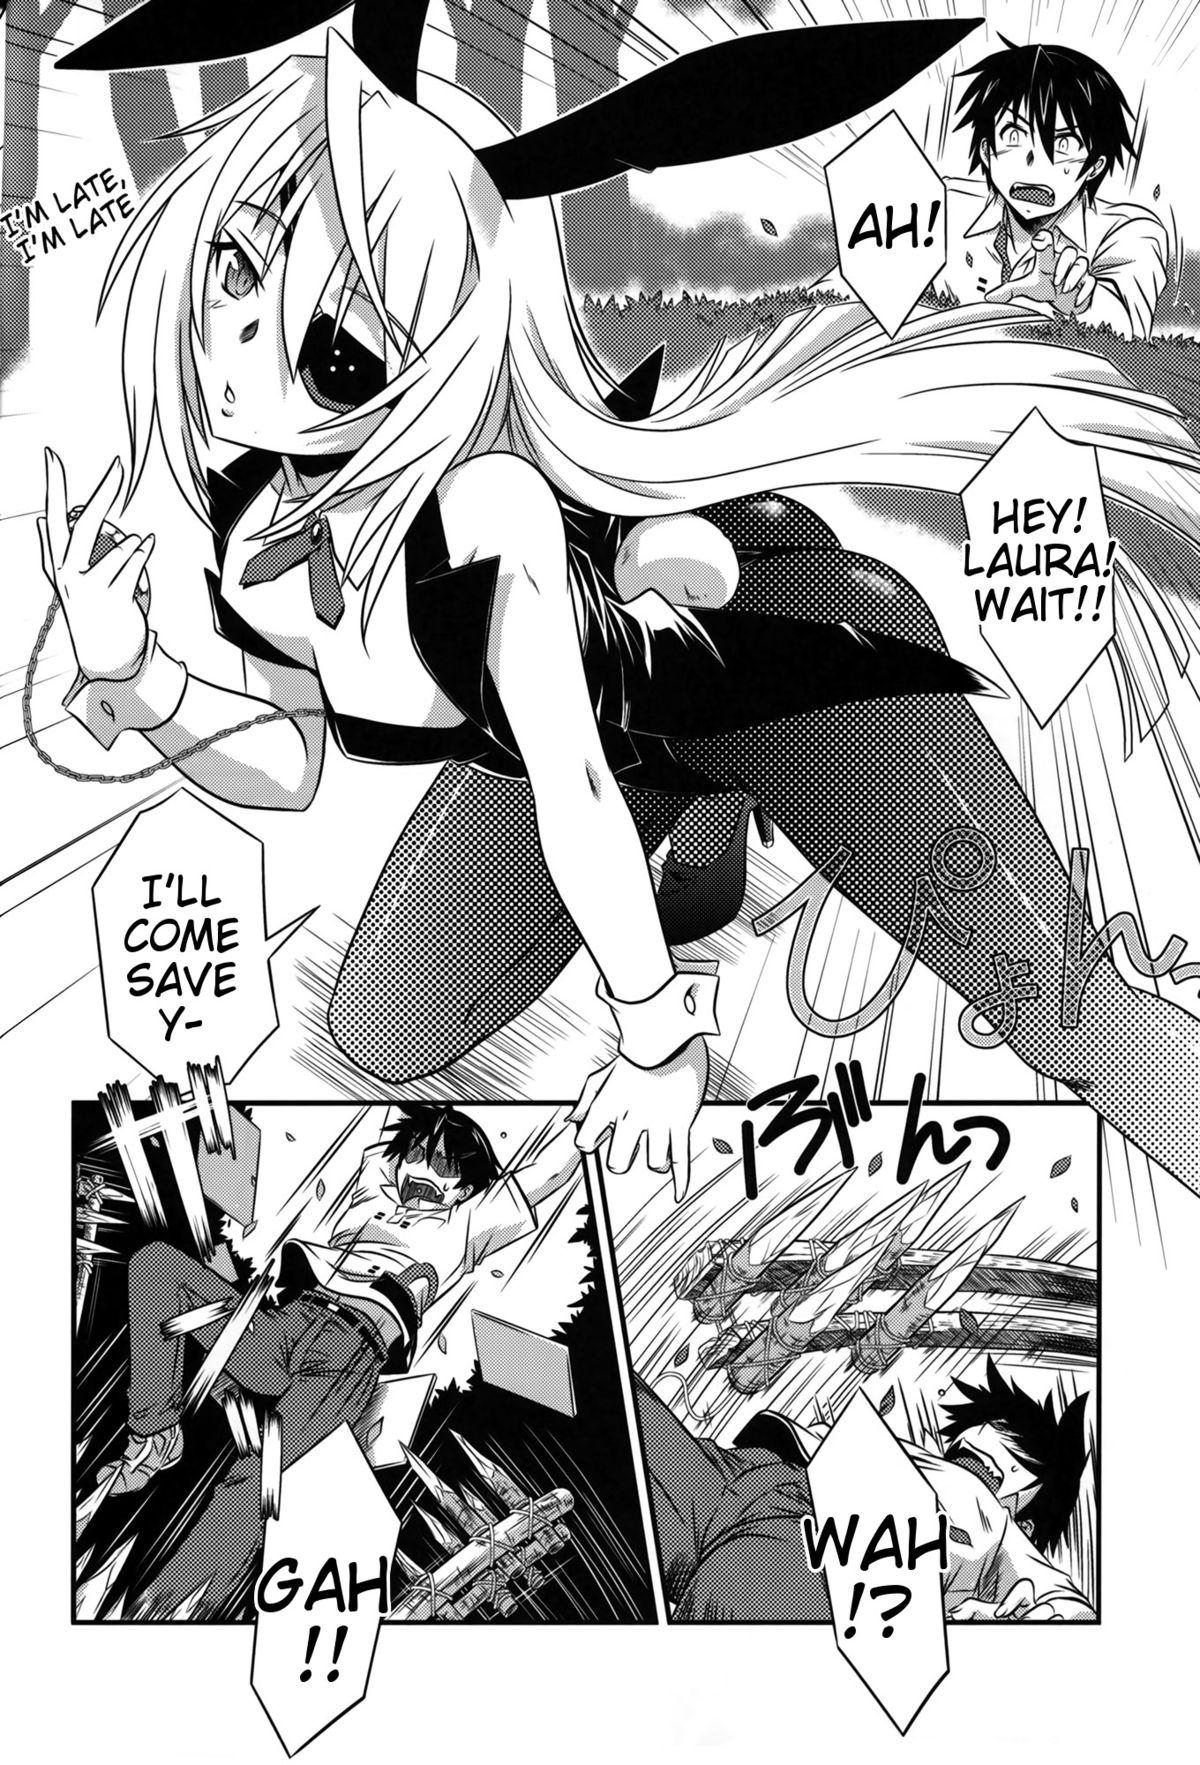 Humiliation Pov is Incest Strategy 4 - Infinite stratos Juggs - Page 4